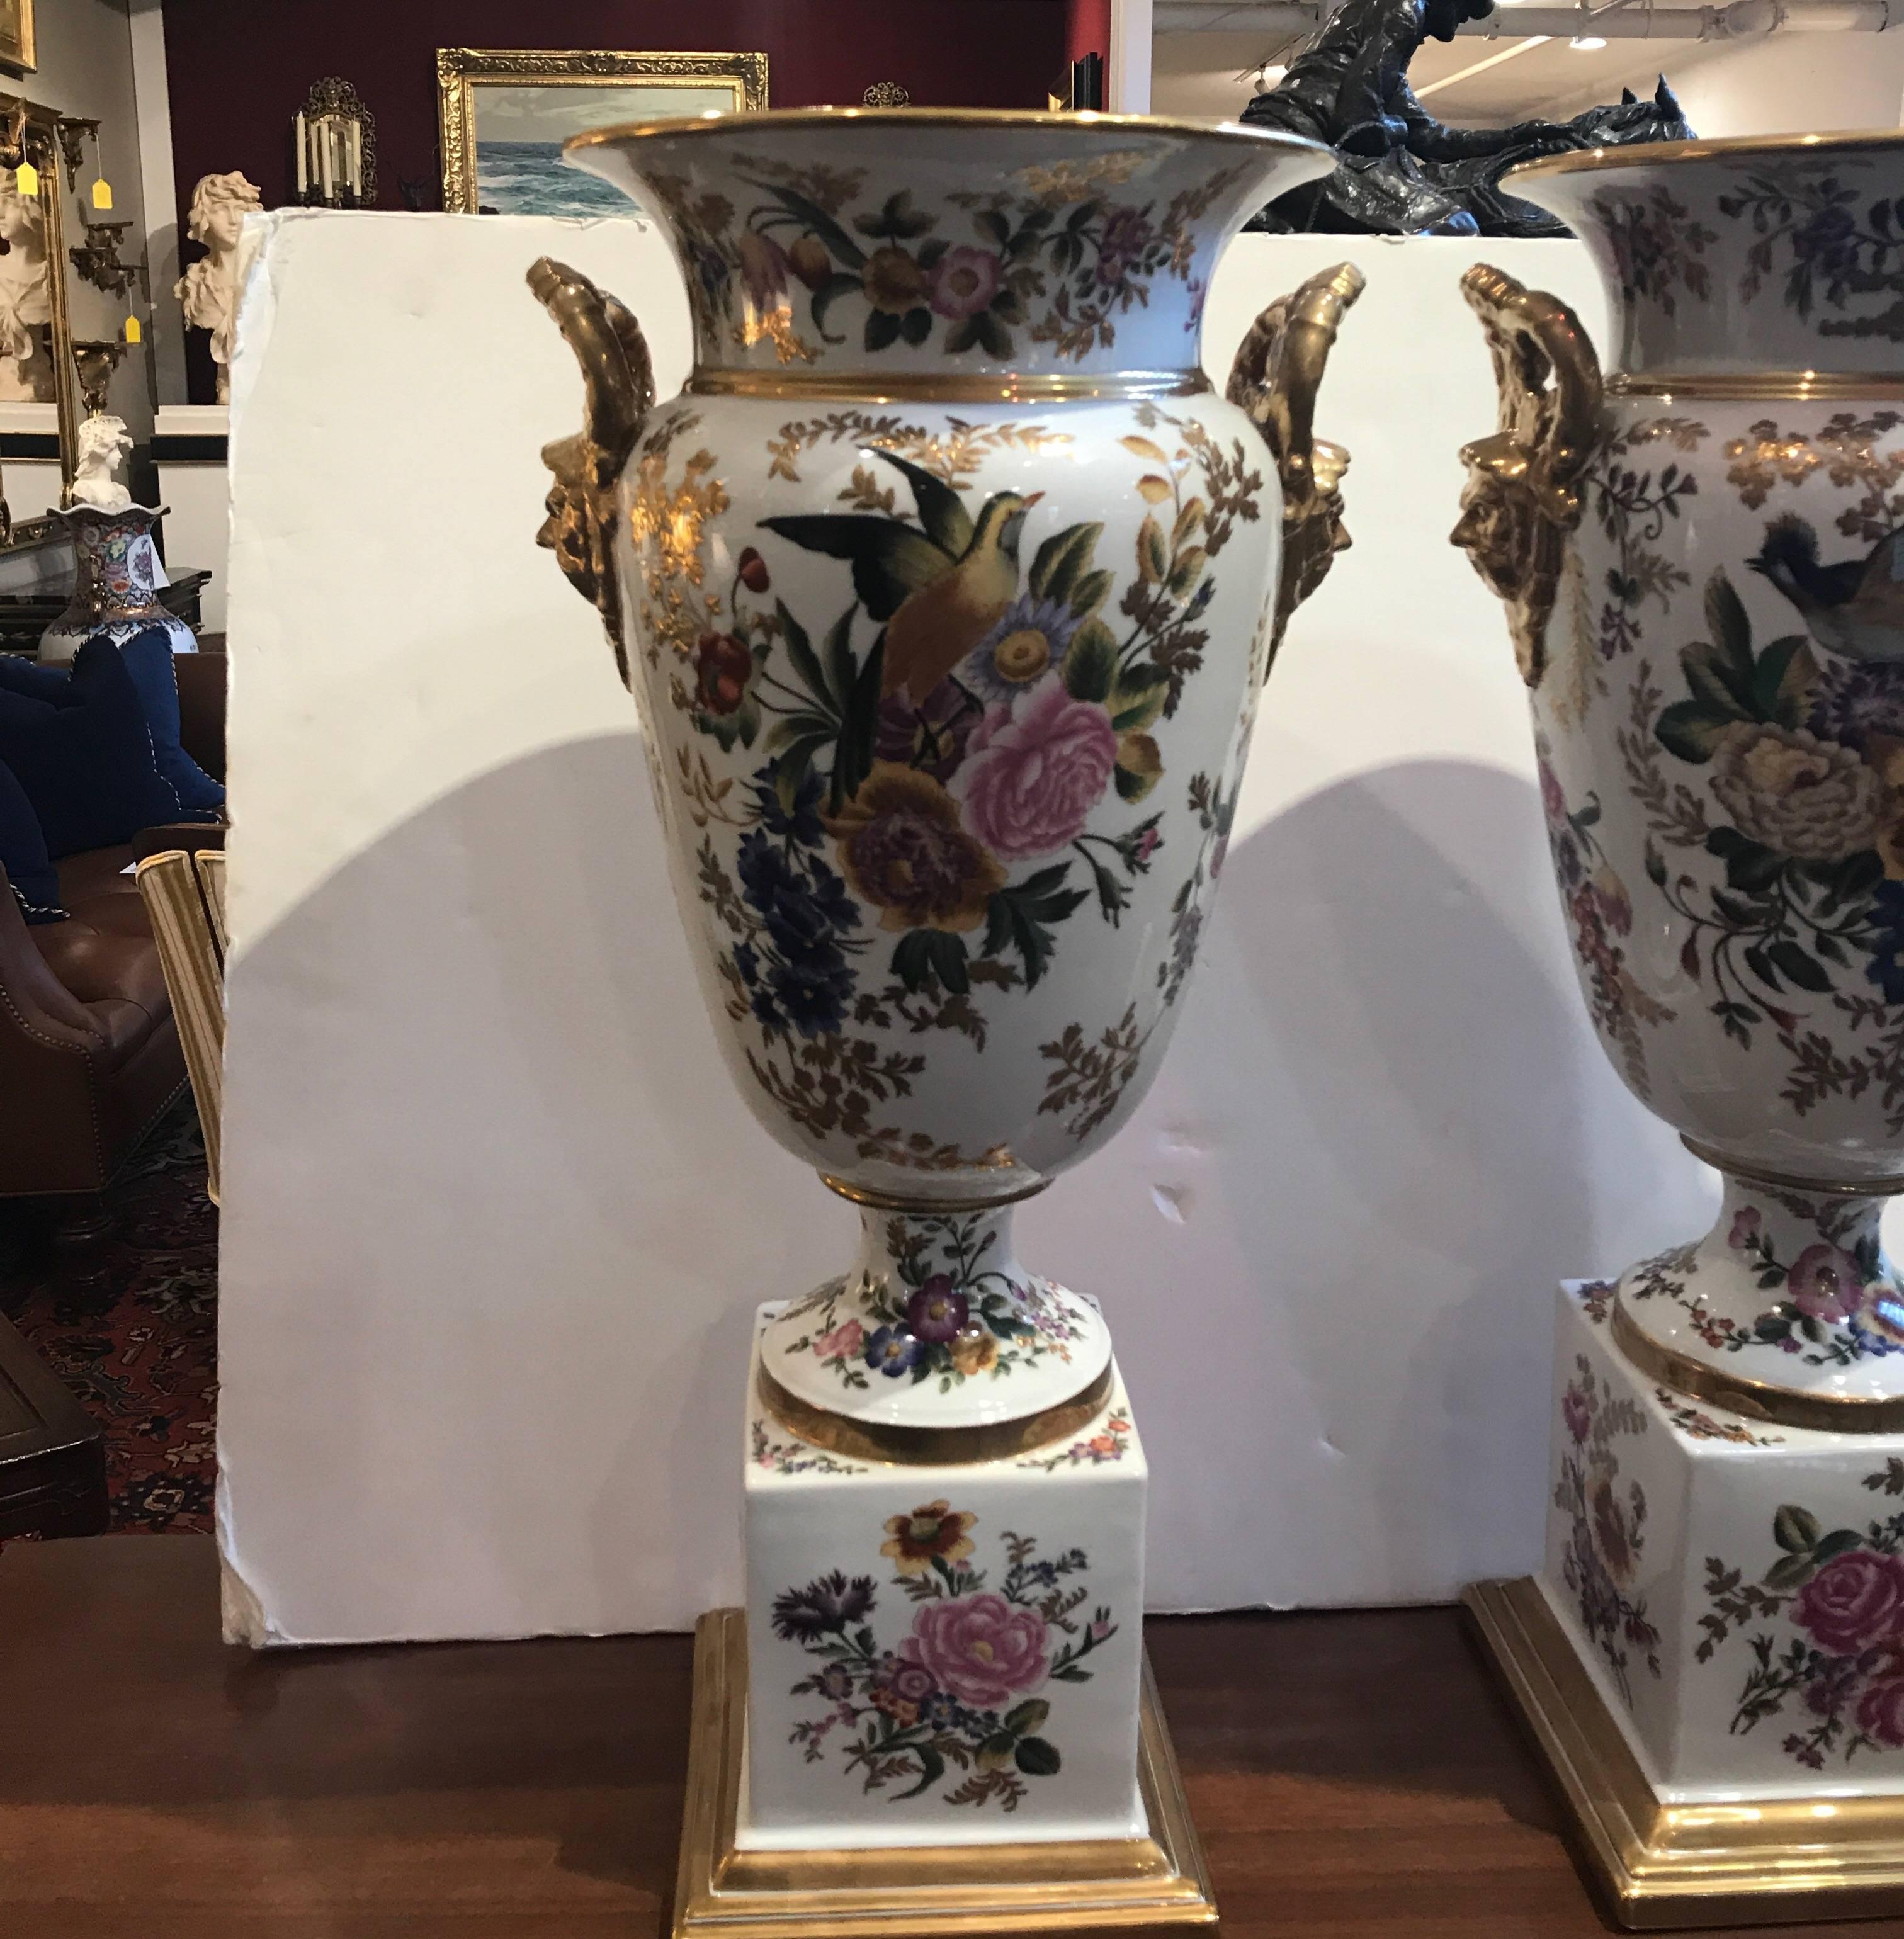 Elegant and grand hand painted porcelain urns in the style of Old Paris. These are made by Chelsea House. These are of large size and scale with impressive hand-painted birds and floral decoration in the old Paris porcelain style of the 19th